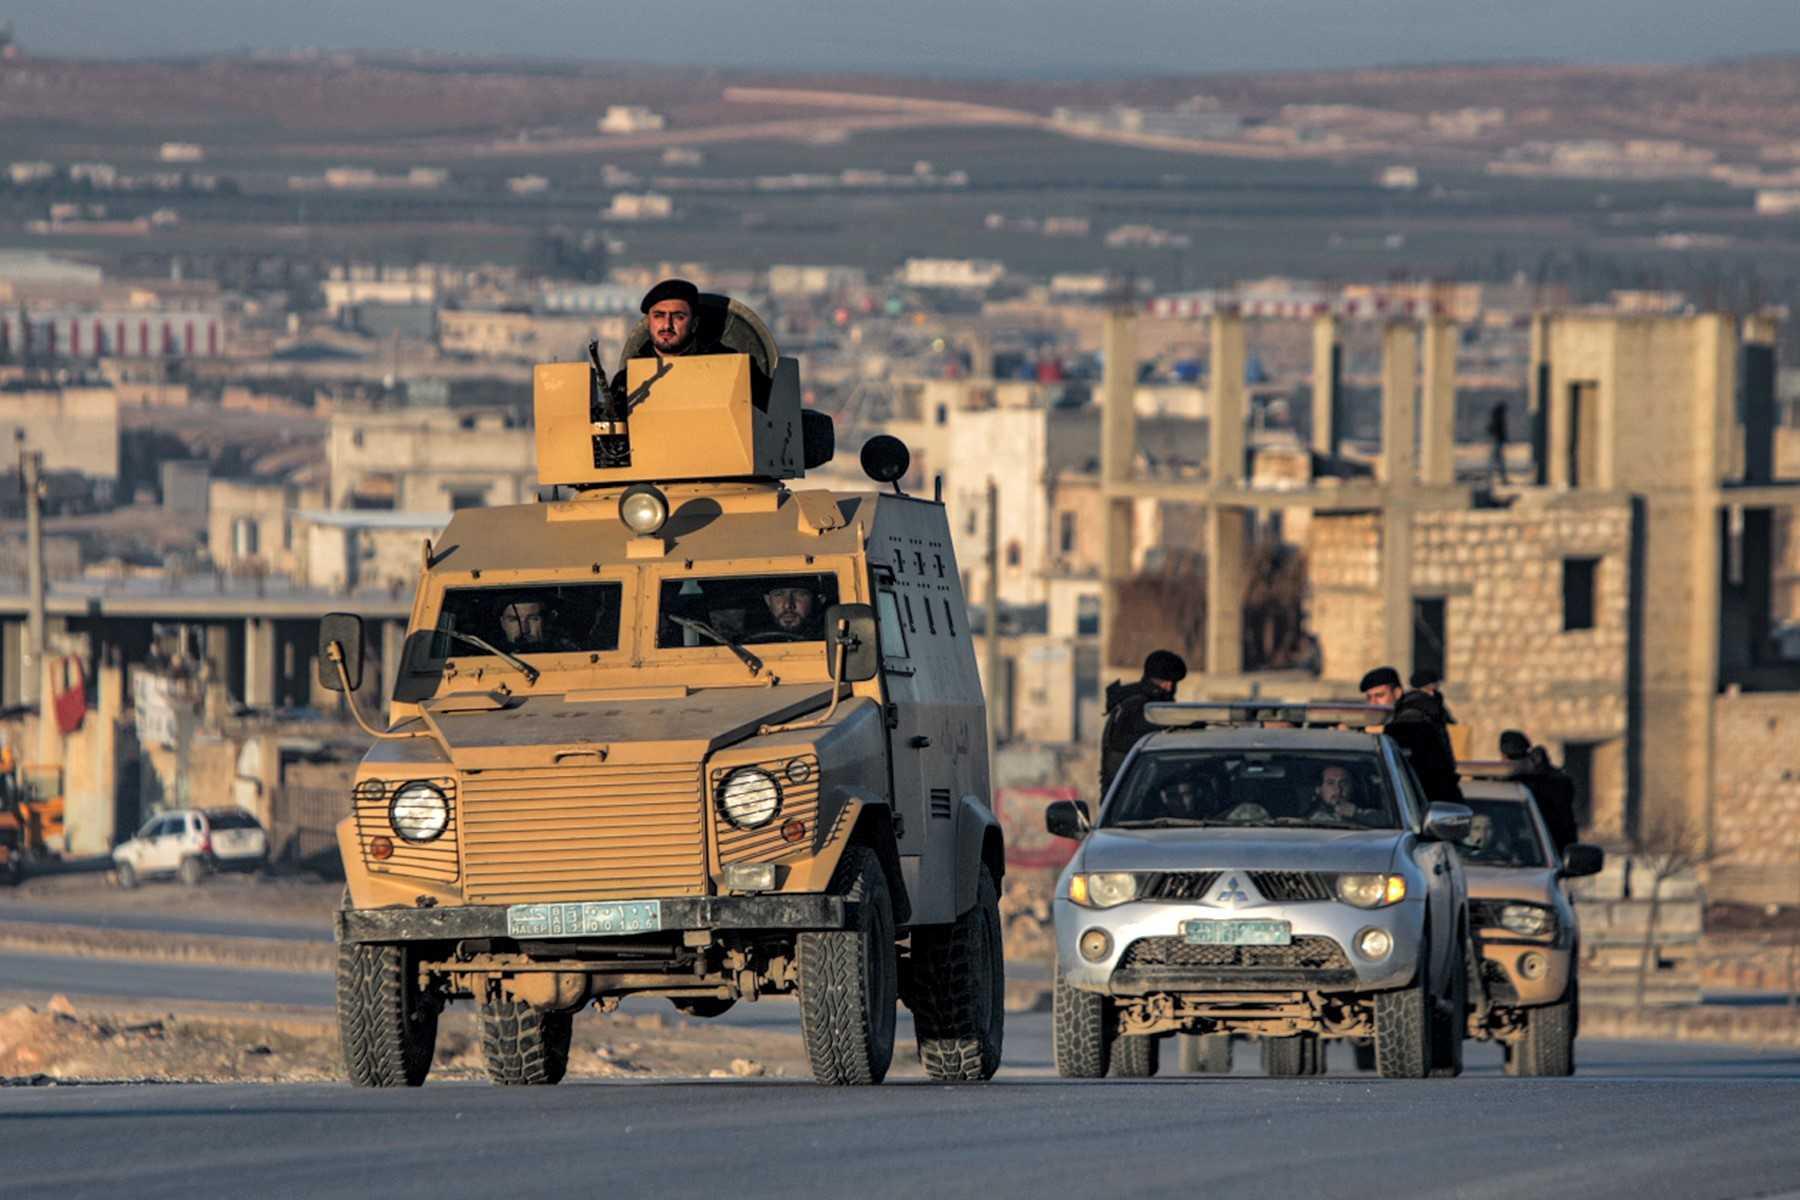 Turkey-backed Syrian fighters deploy in vehicles in al-Bab in the northern rebel-held part of Syria's Aleppo province on Jan 3. Photo: AFP 